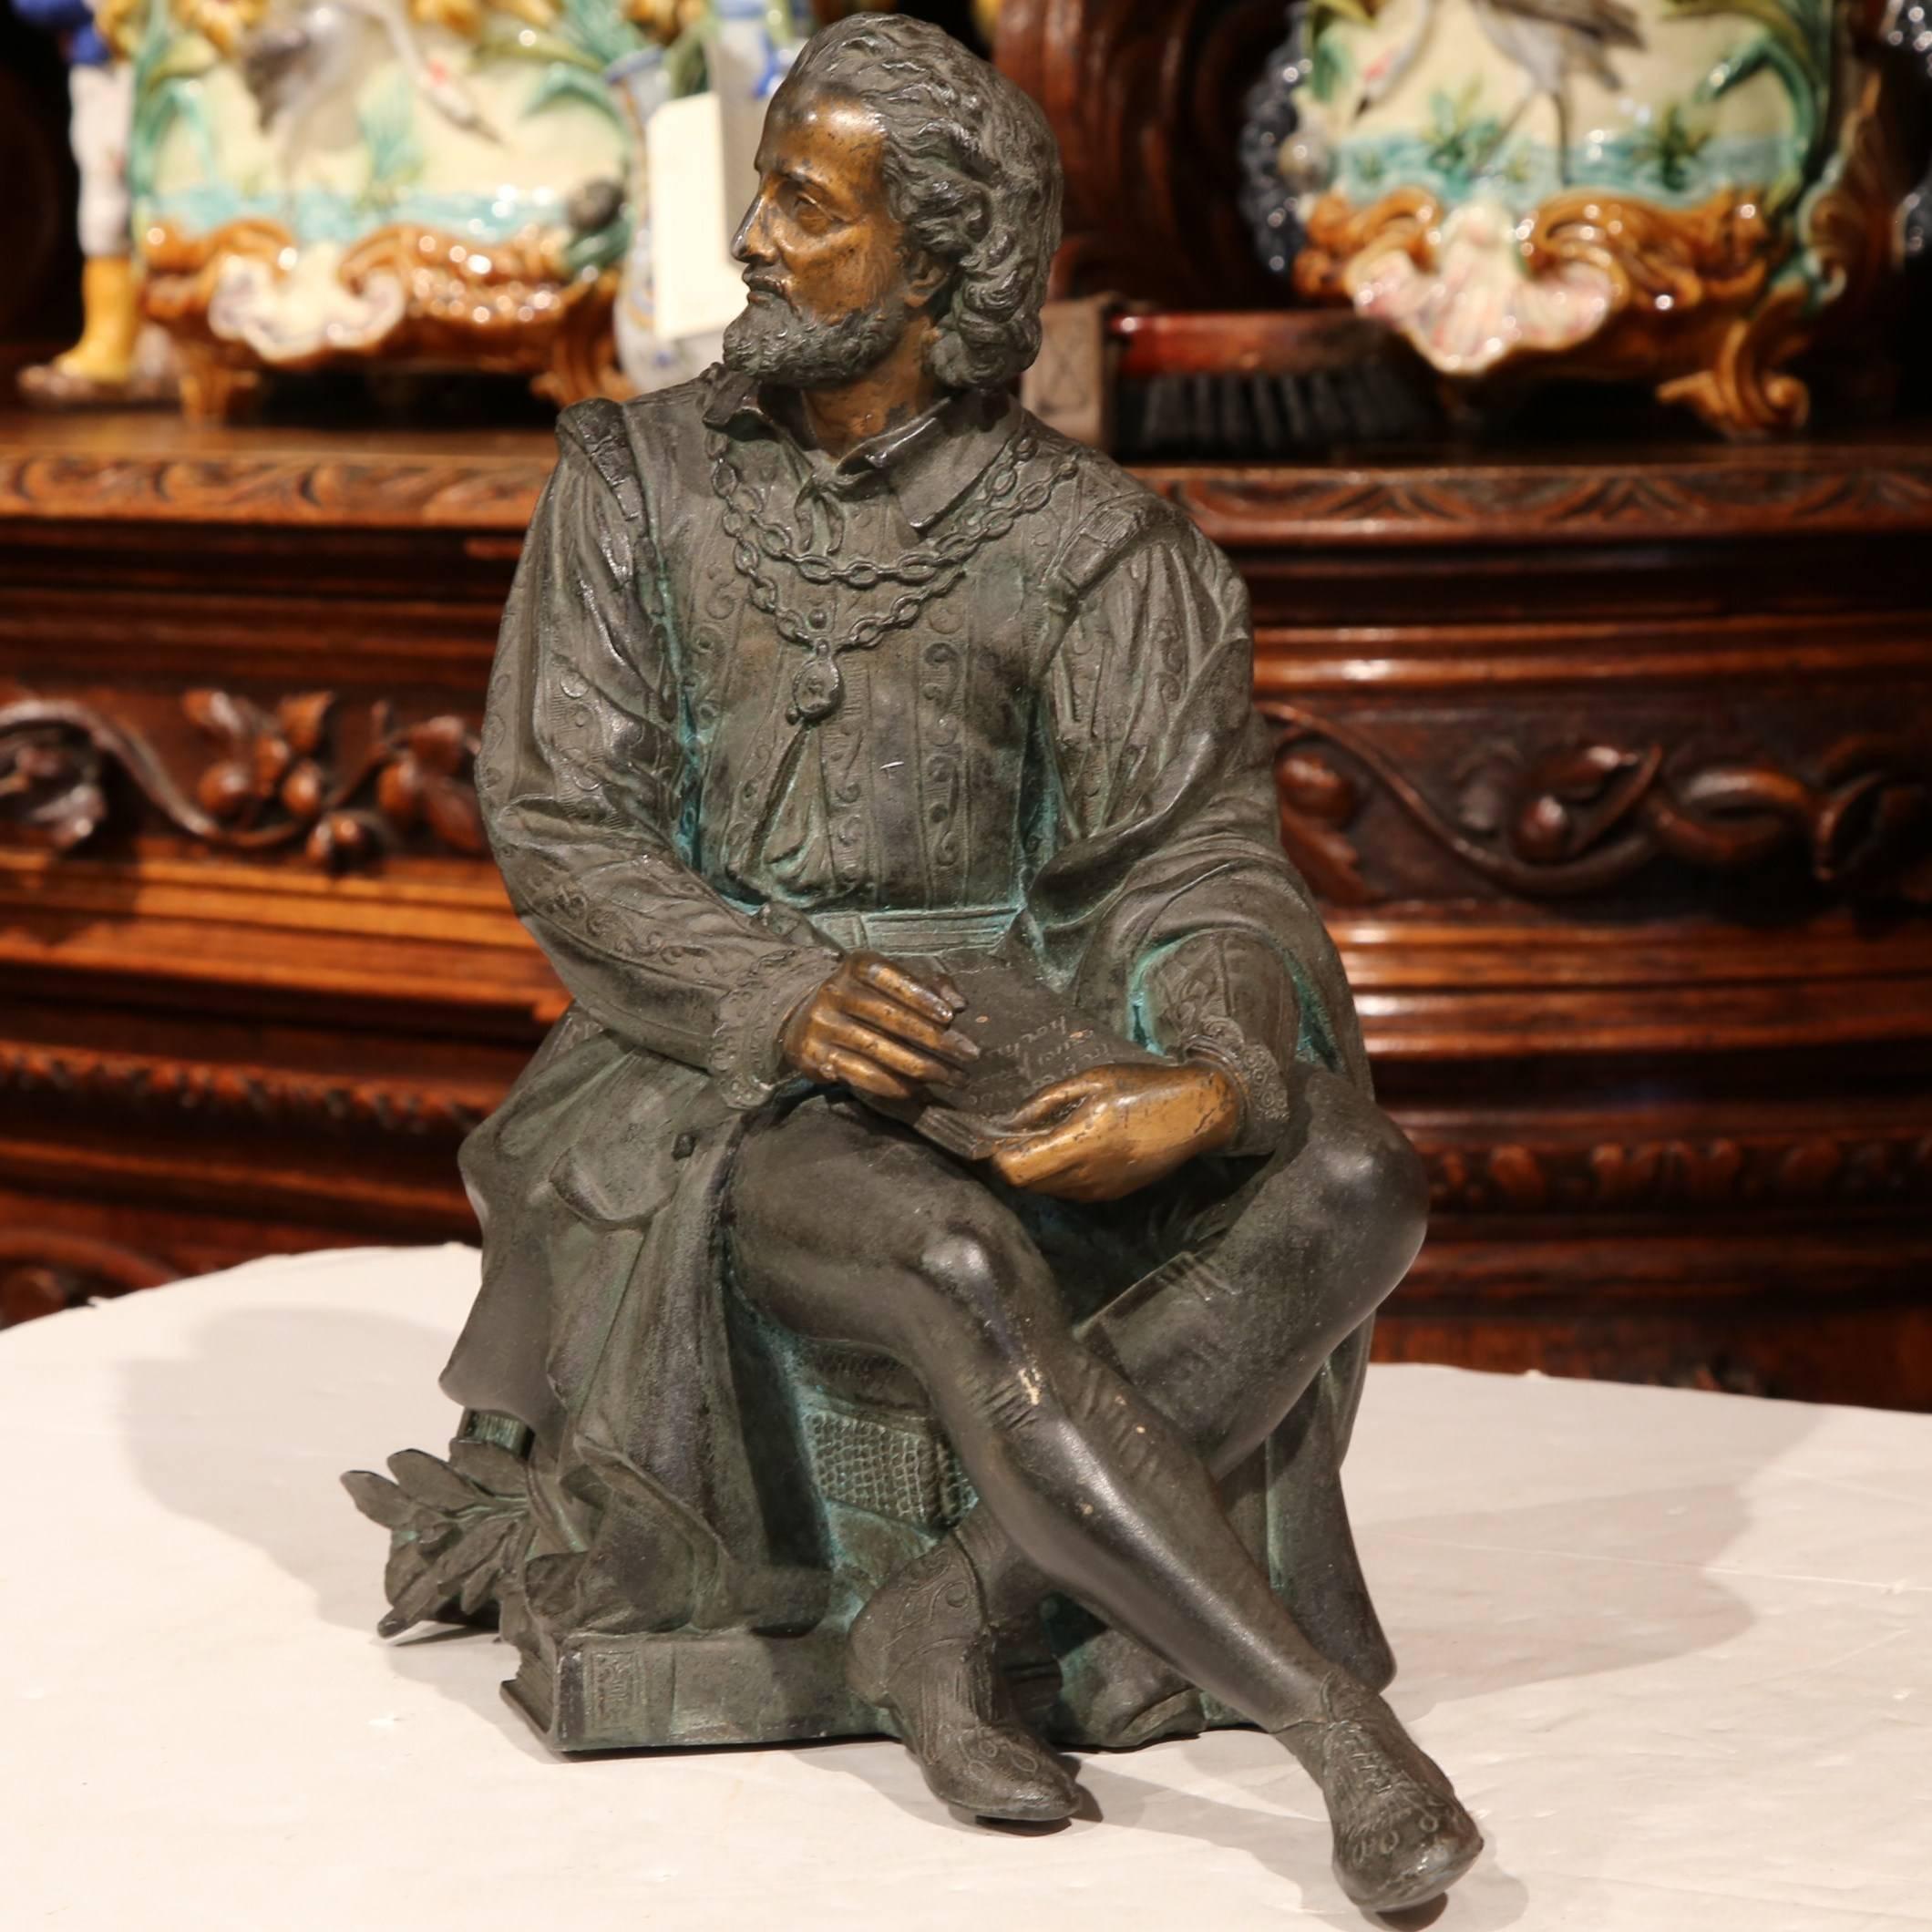 Accessorize your study or den with this elegant antique spelter statue from France. Crafted circa 1860, the detailed metal sculpture features a classic philosopher figure in a seated position deep in thought and holding a book with engraved Latin